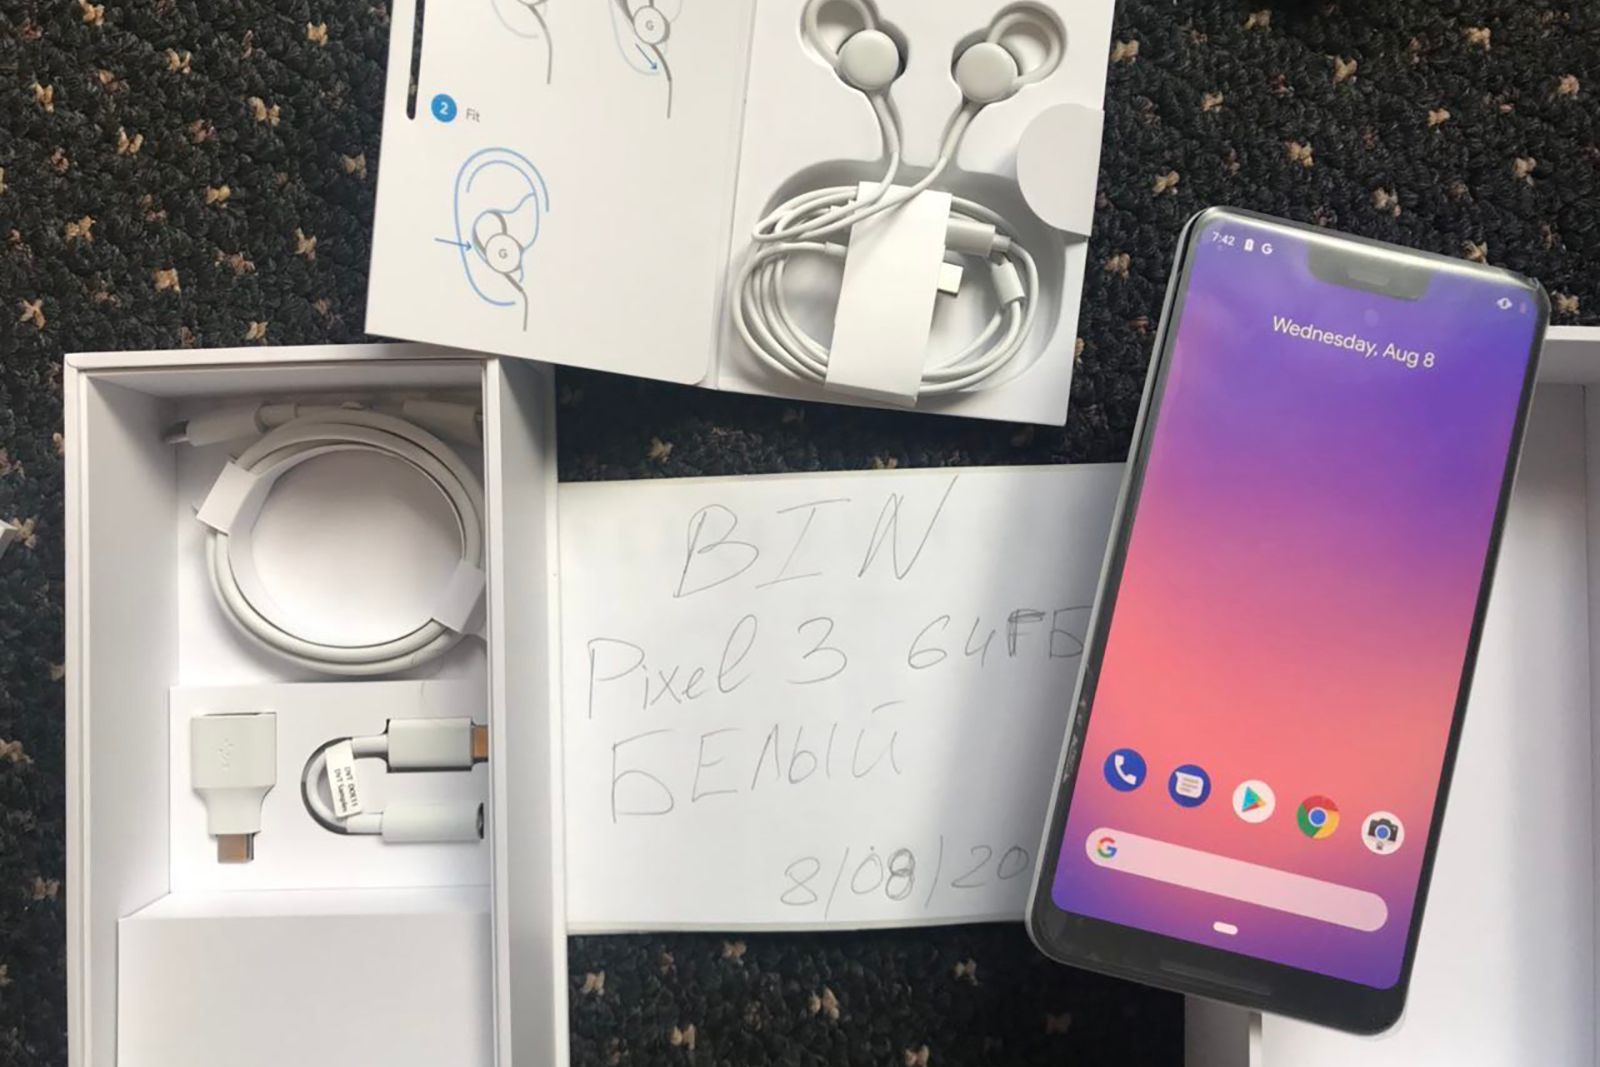 Google Pixel 3 XL fully revealed in hands-on pics and video image 1